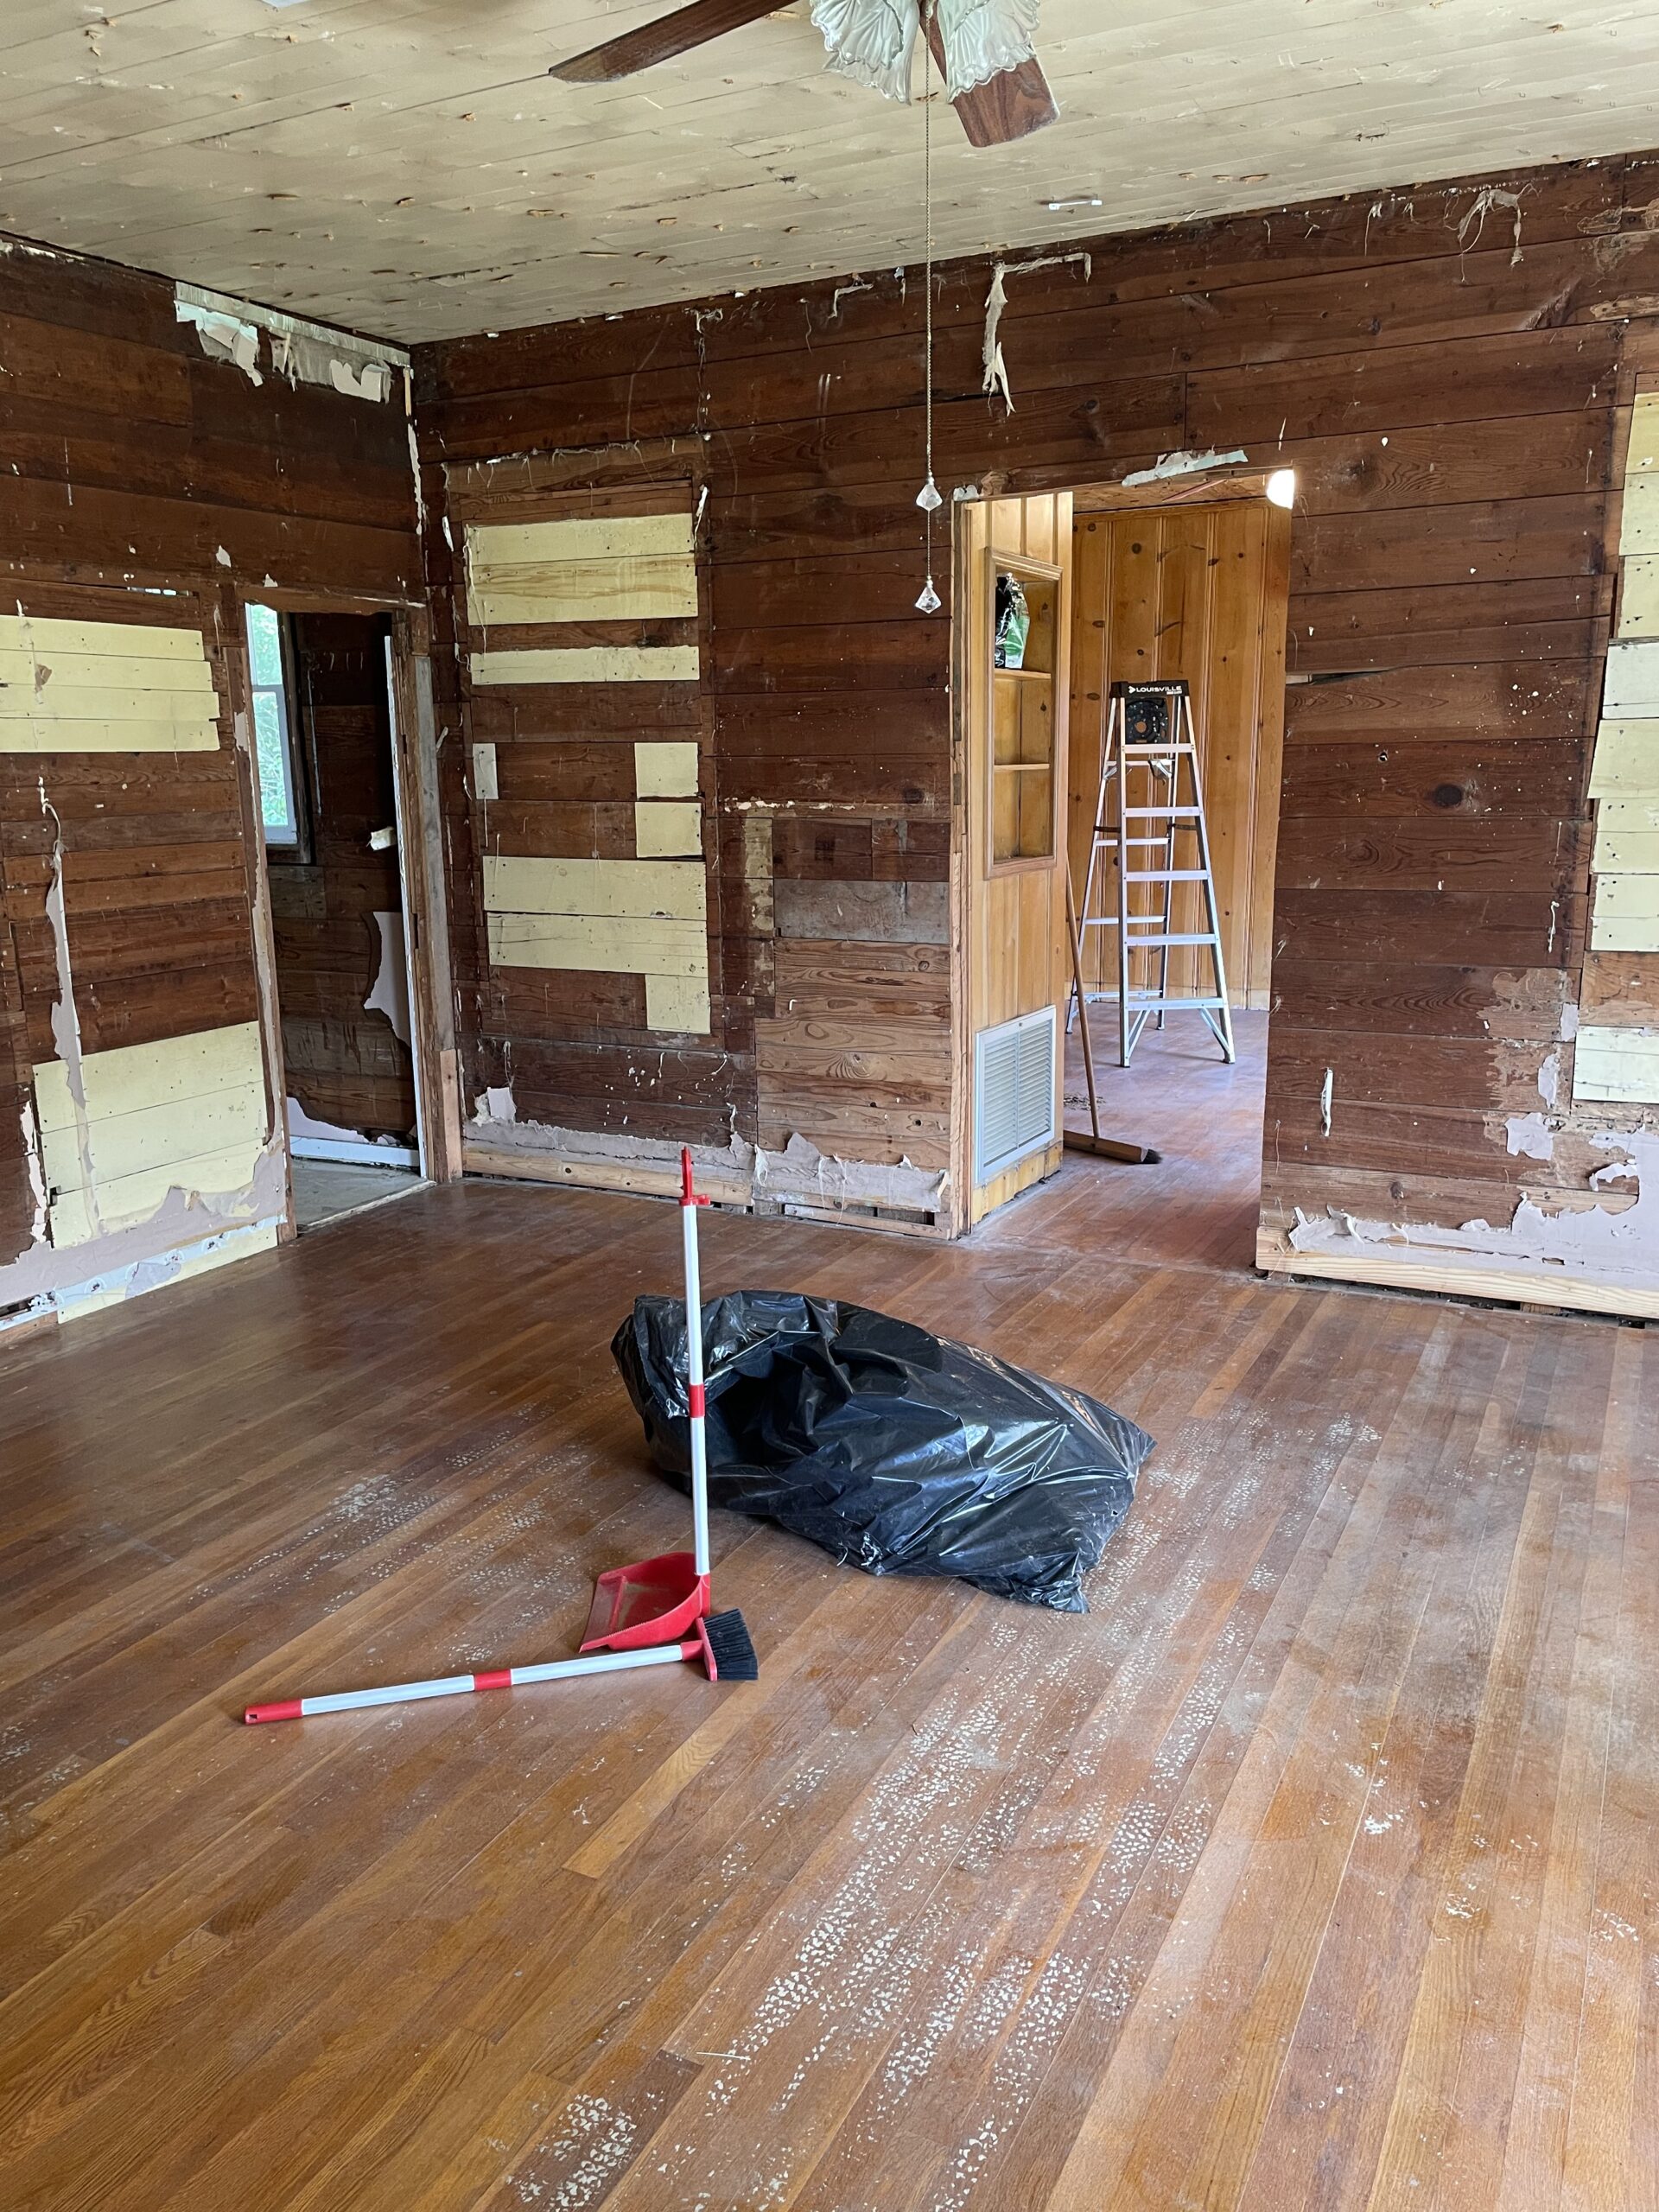 Image of a room with exposed wood walls and ceilings. Wood is not in good condition. 